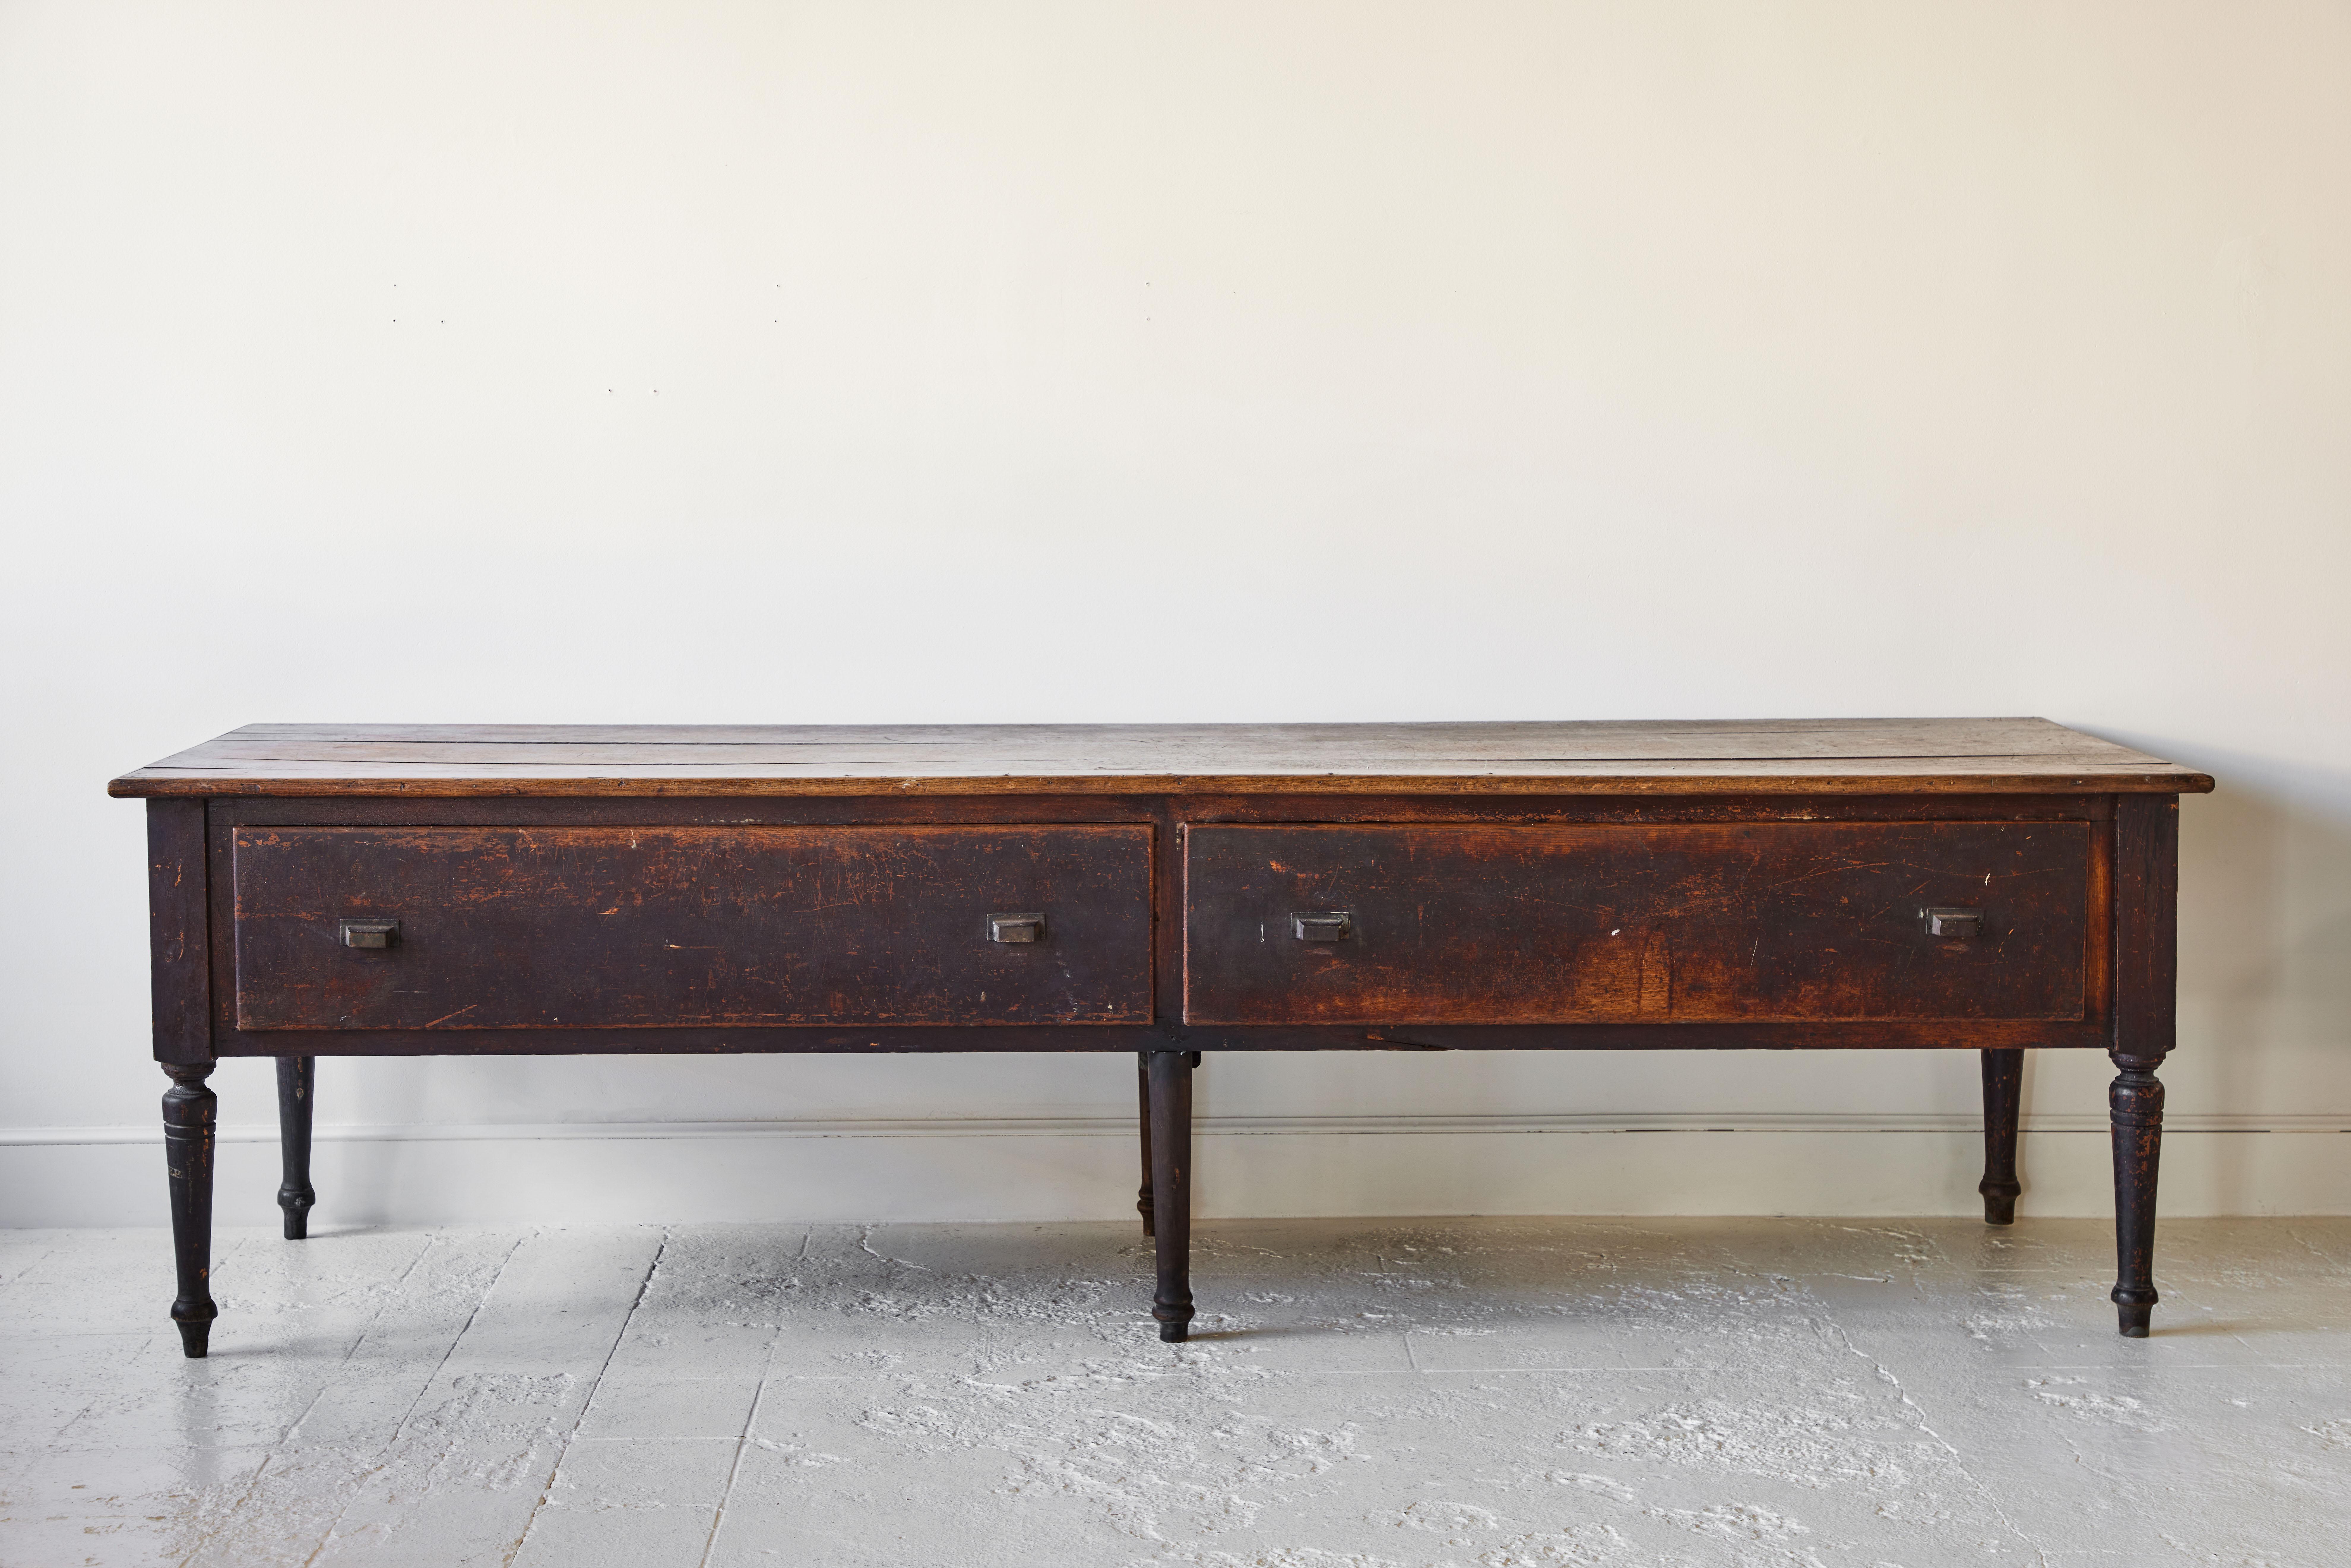 Beautifully crafted 1930s bank table with six turned legs and two drawers on the side, the wood is beautifully stained.